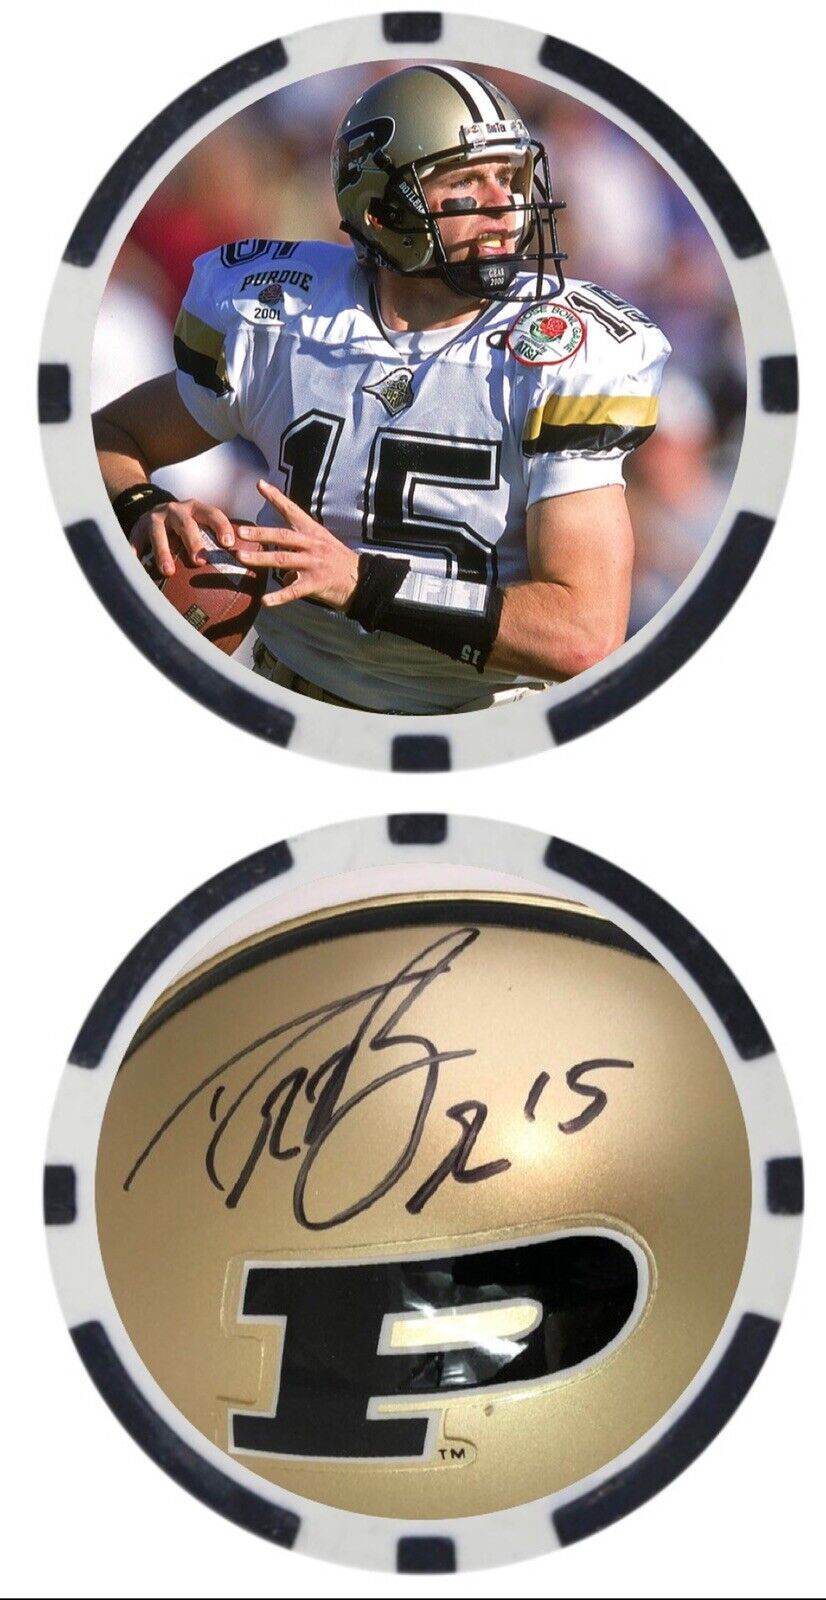 DREW BREES - Purdue Boilermakers - NOVELTY - POKER CHIP  ***SIGNED***